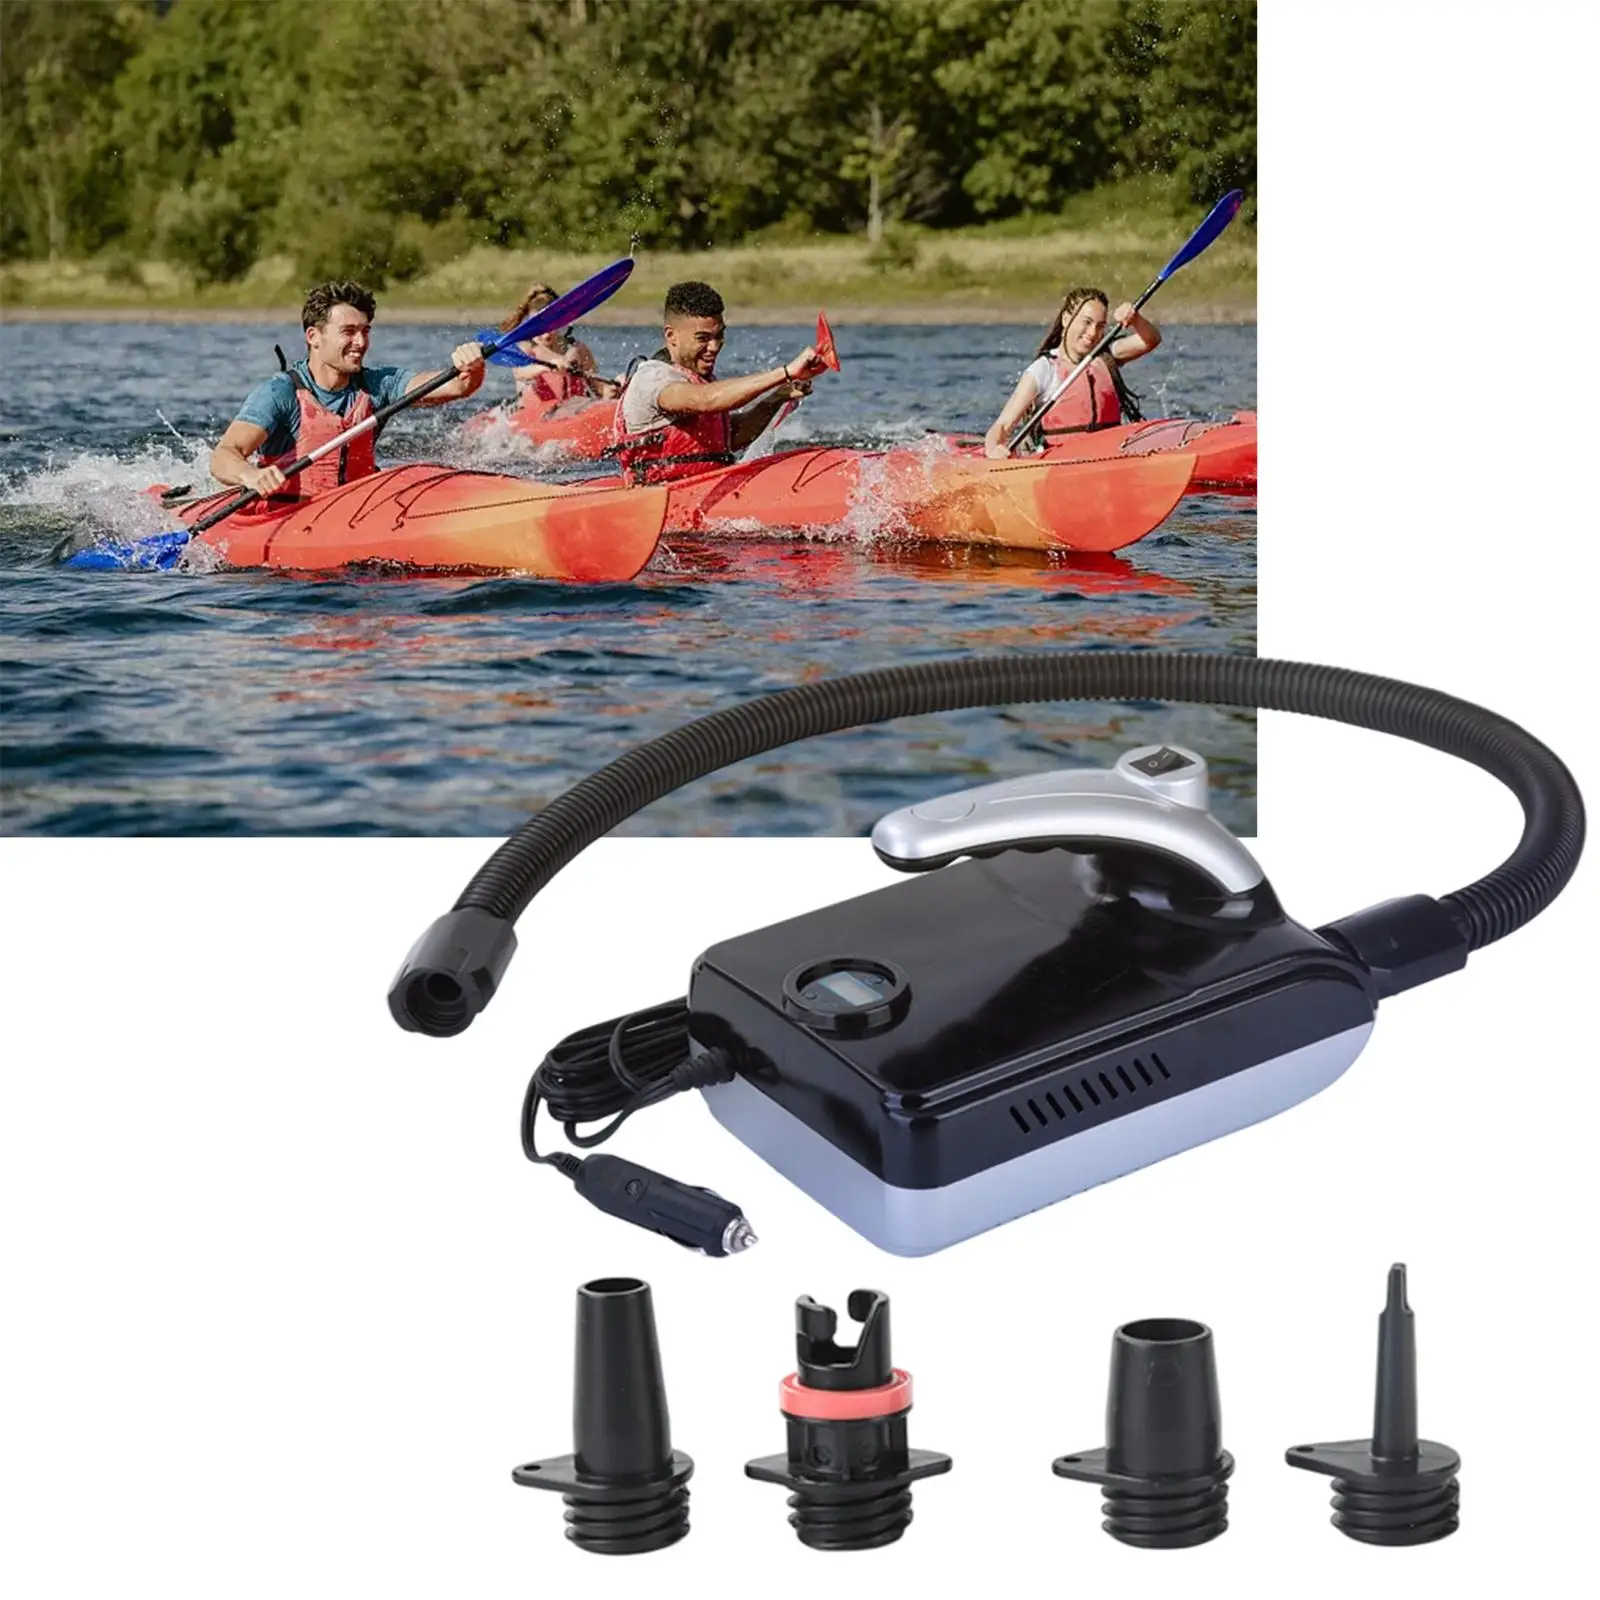 0~20PSI Electric Air Pump Digital 10A W/ 4 Nozzles W/ Display Electric Pump Inflator Deflator for Boat Paddle Board Pools Toys